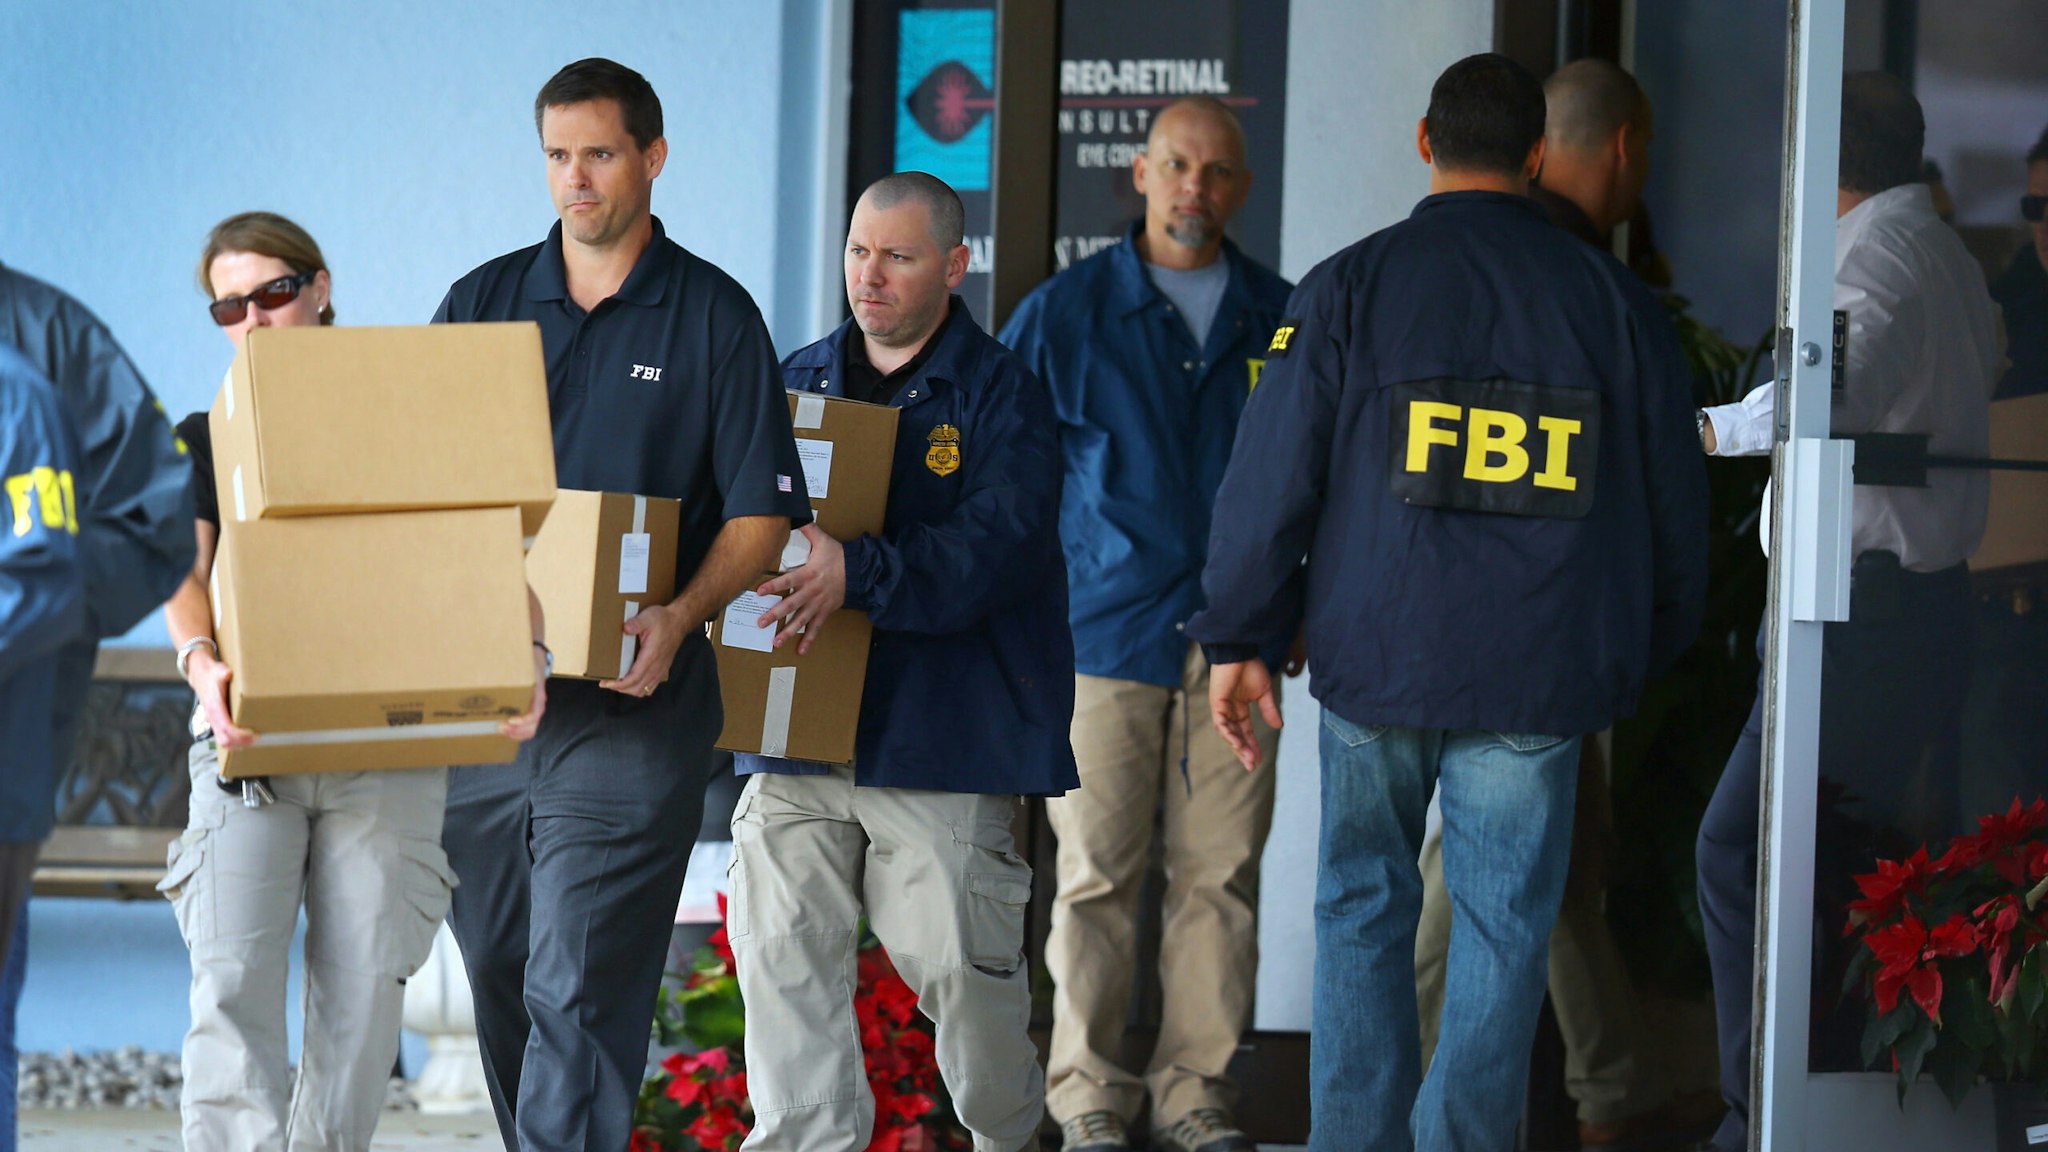 WEST PALM BEACH, FL - JANUARY 30: FBI agents carry out boxes as law enforcement officials investigate the medical-office complex of Dr. Salomon Melgen who has possible ties to U.S. Sen. Bob Menendez (D-NJ) on January 30, 2013 in West Palm Beach, Florida. The agents arrived last night at the medical-office complex and started hauling away potential evidence in several vans.